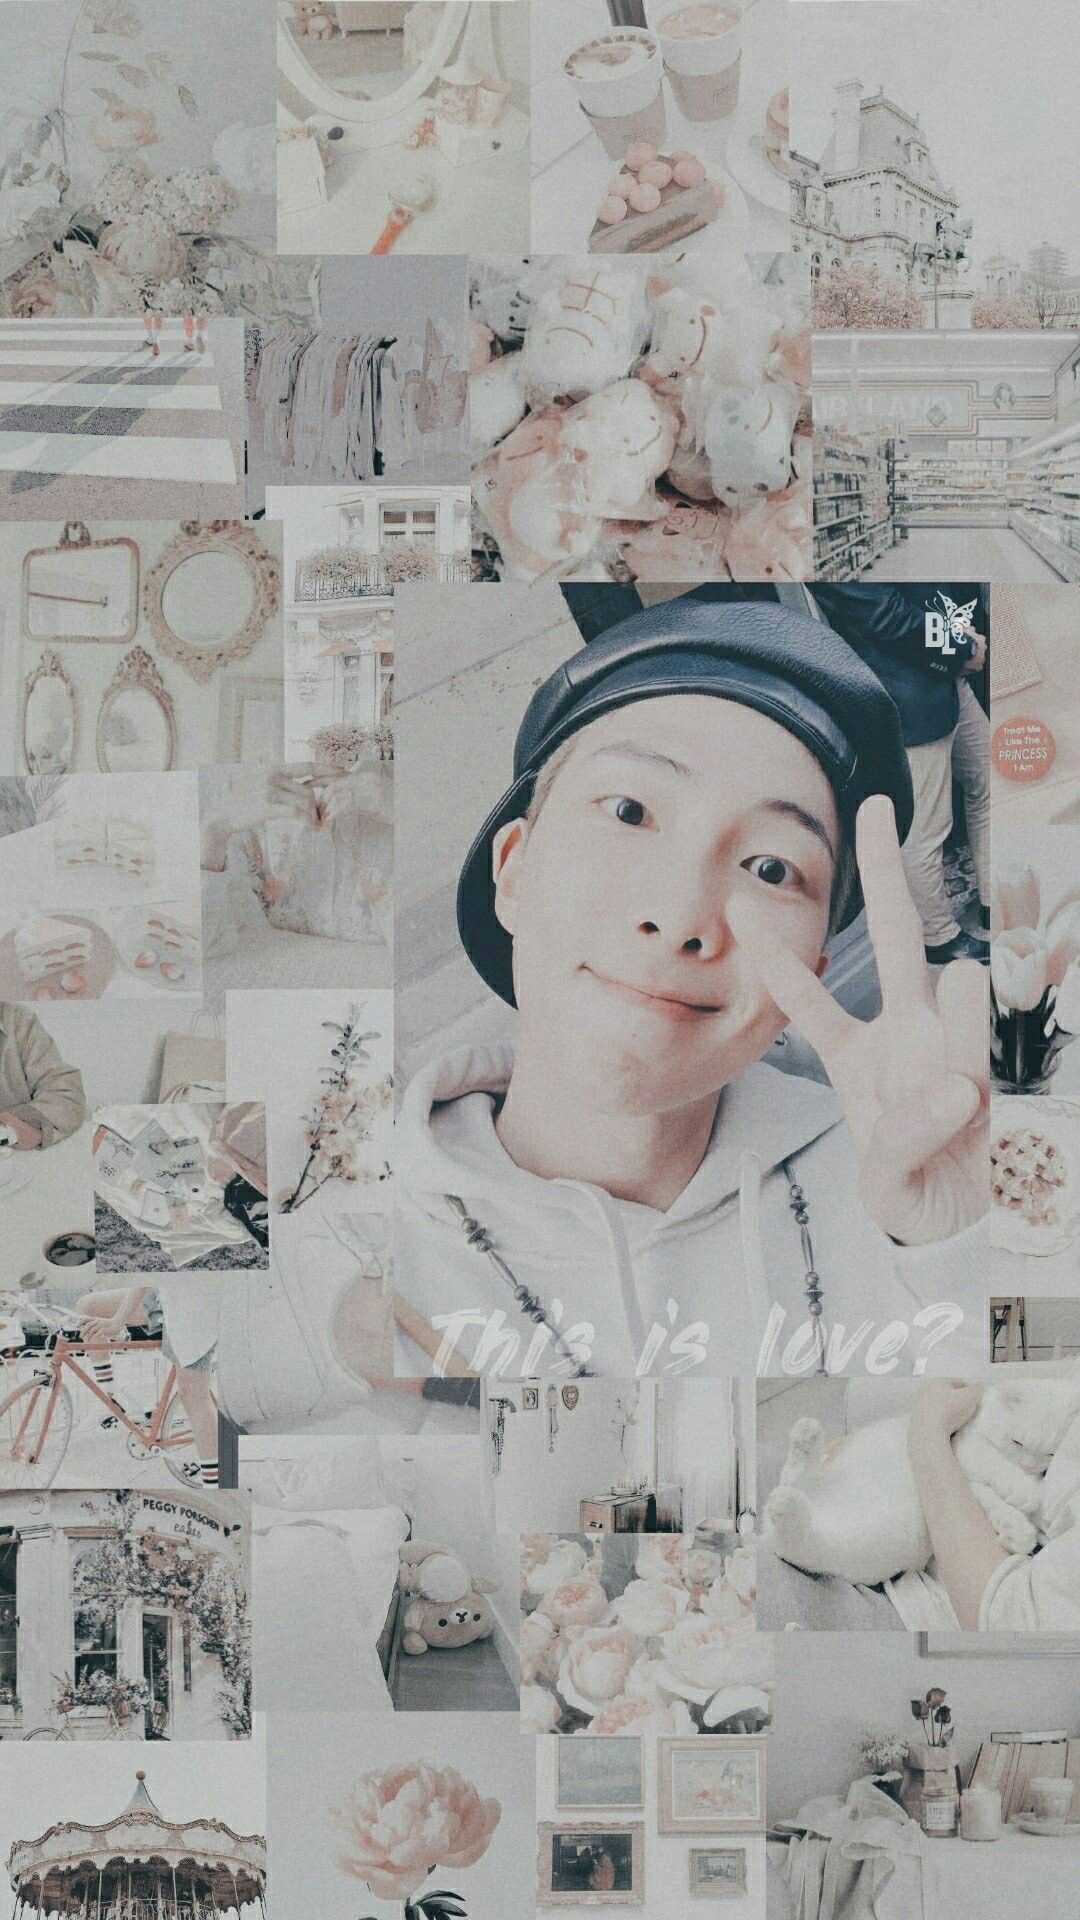 Aesthetic wallpaper of the member of a Kpop group - BTS